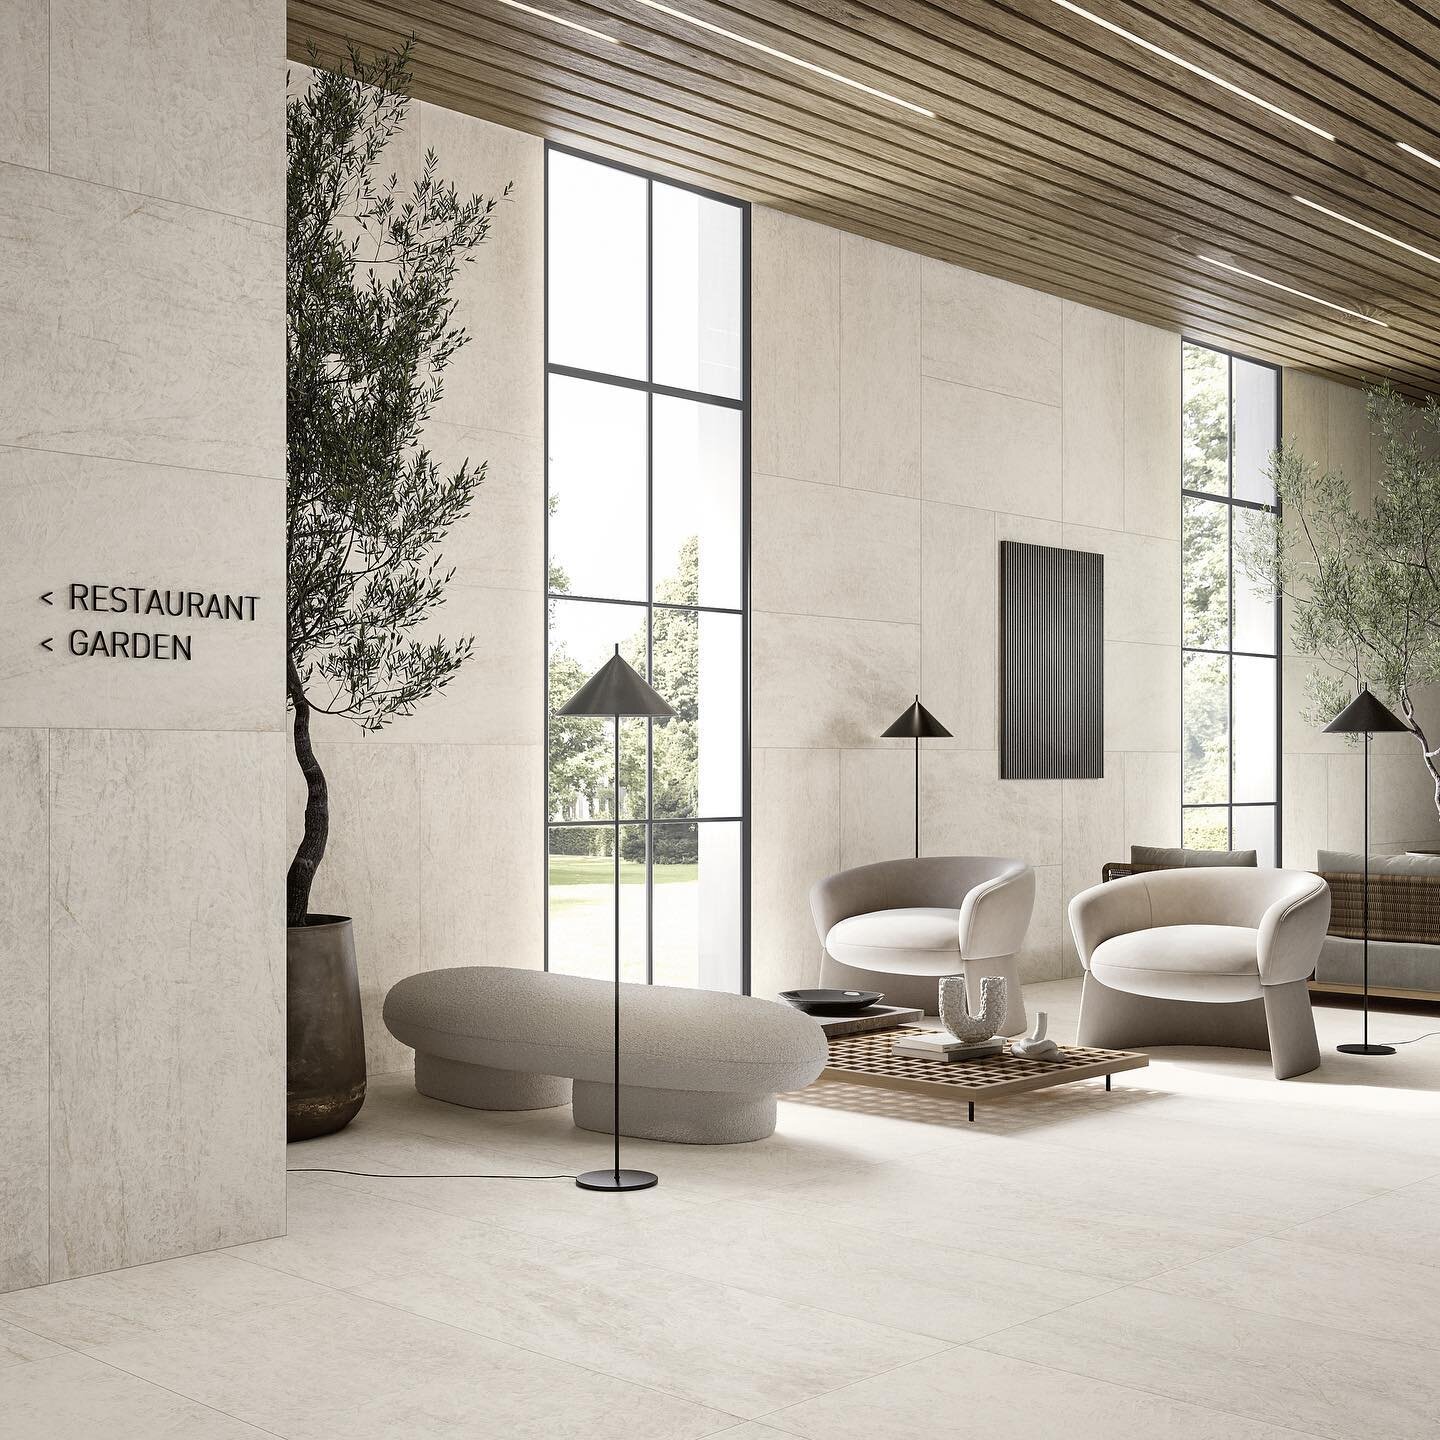 LA SPEZIA | Color Body Porcelain Stoneware

This lovely marble look is available in 8 pattern options, 4 sizes as well as mosaic, hex mosaic and bullnose.  8mm, rectified. 

☝️Follow the link to take a look for yourself! 

#tecarte #tecartetile #teca